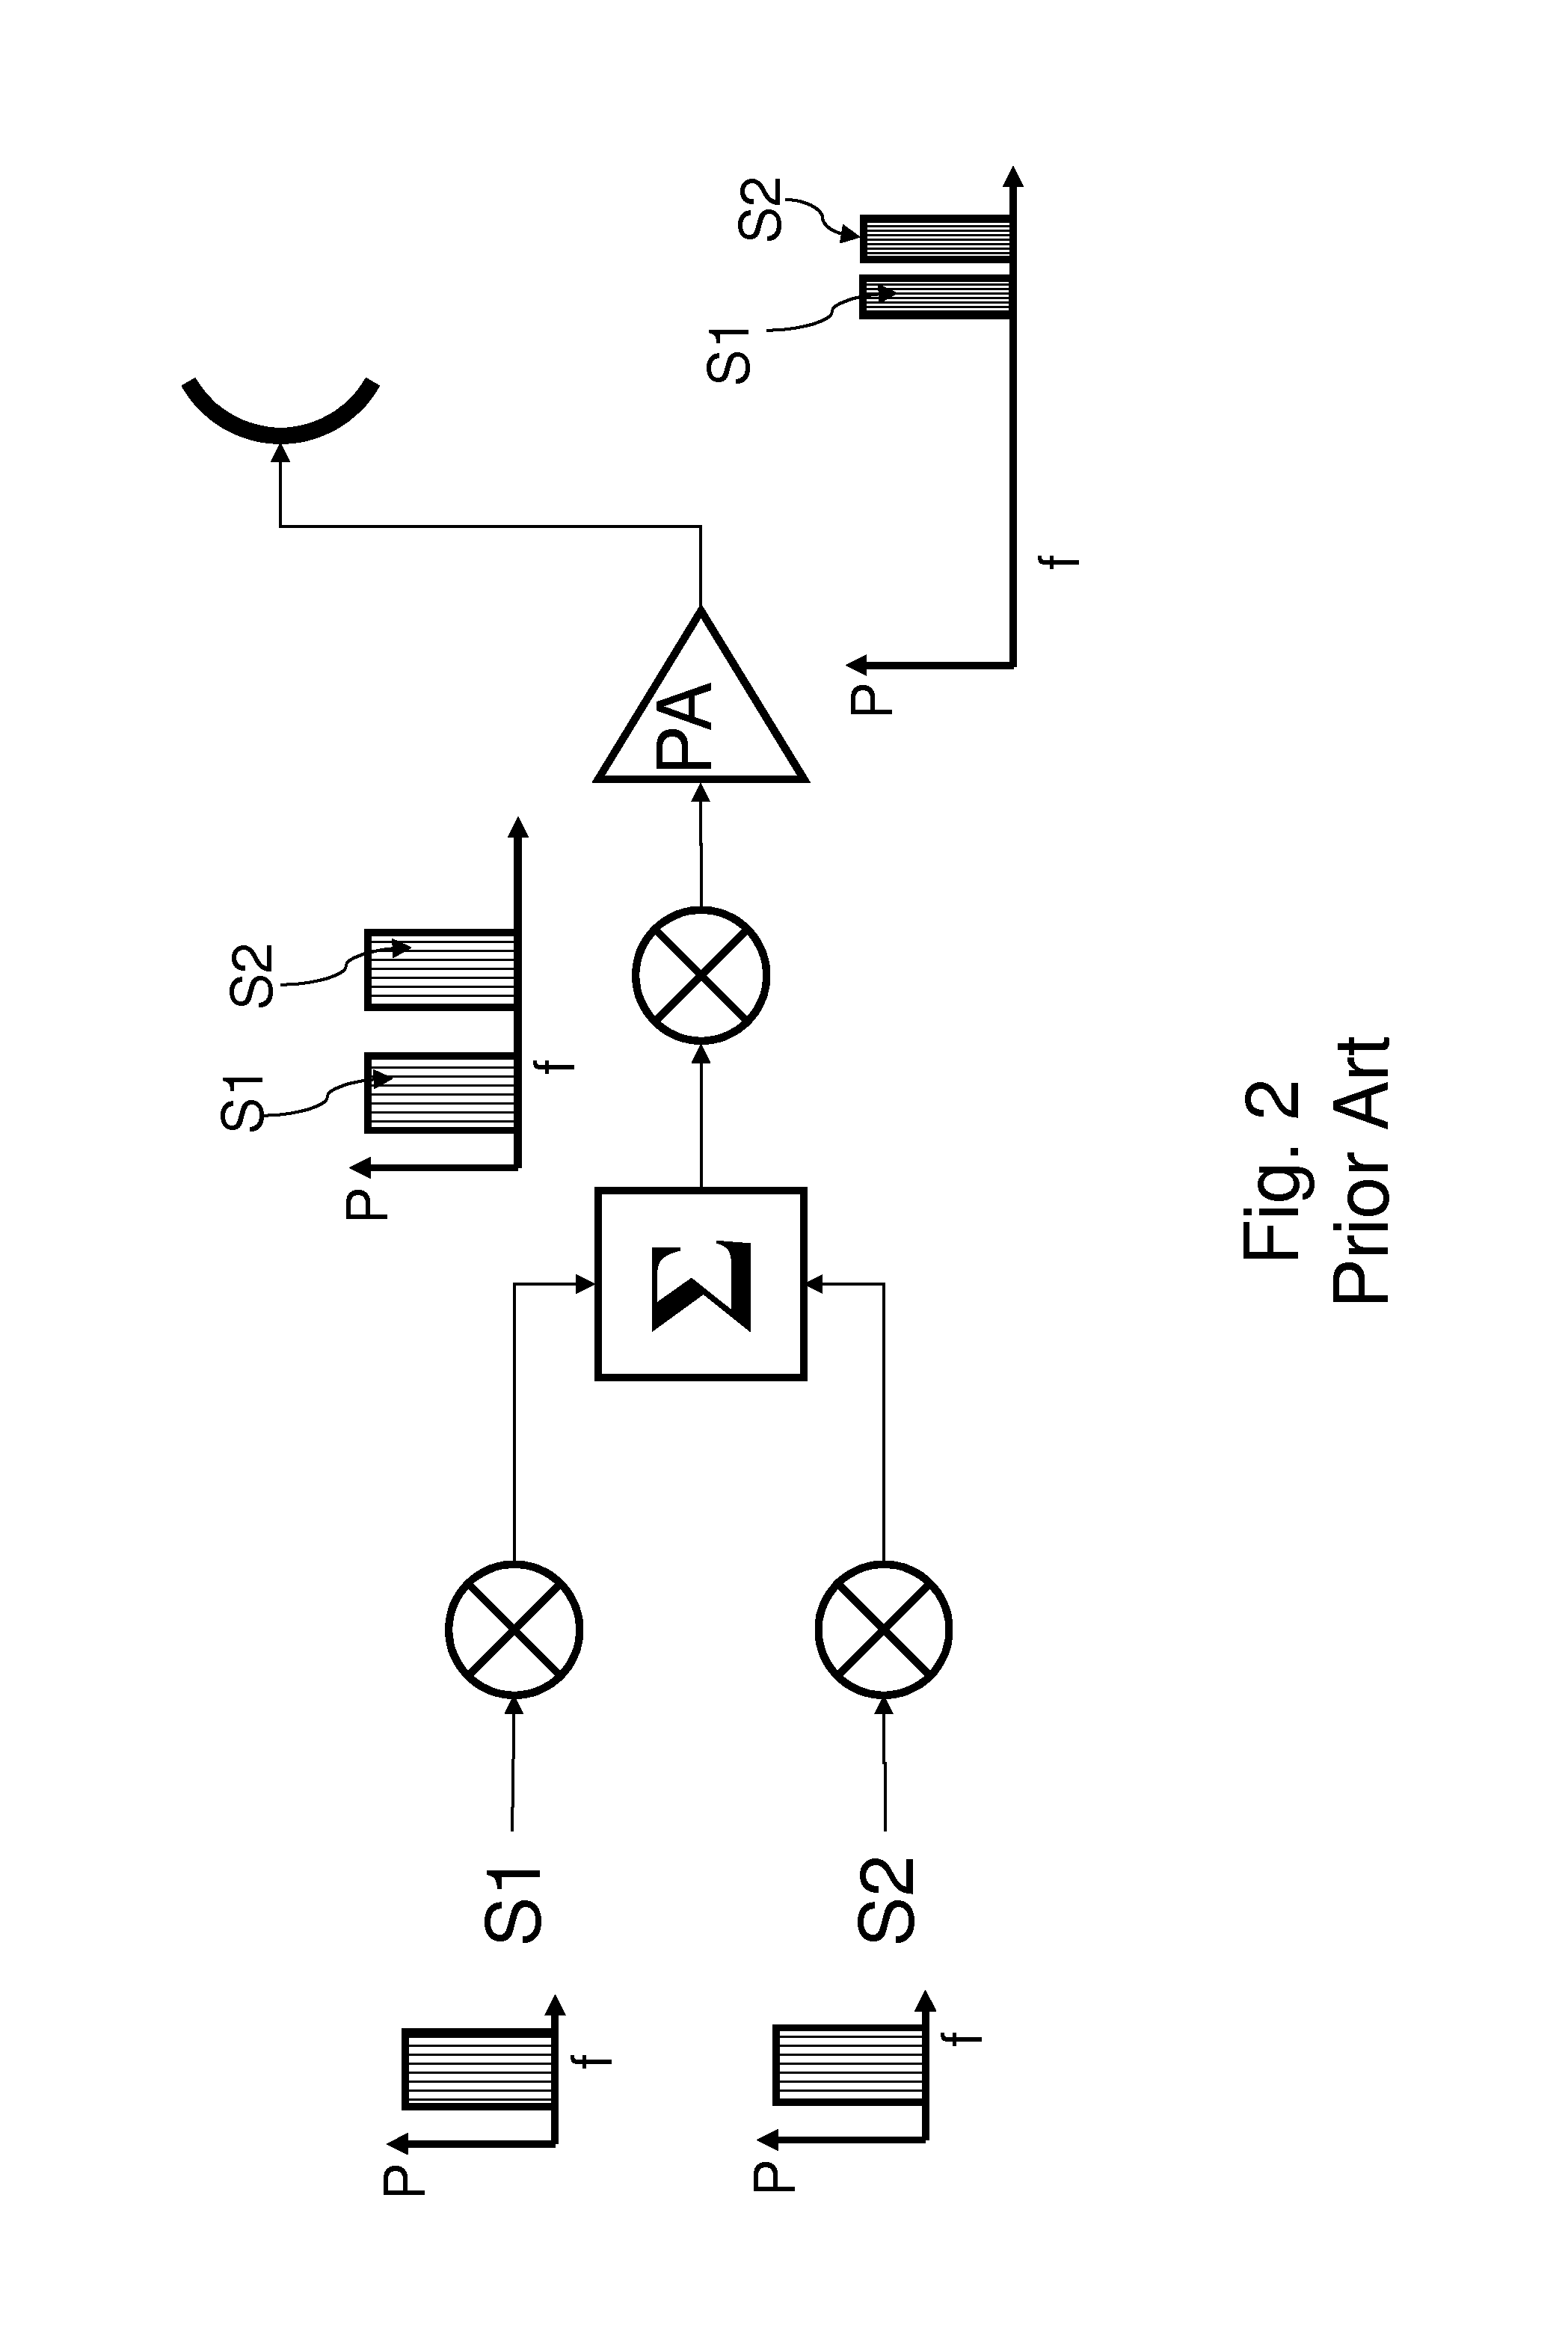 System and Method for Controlling Combined Radio Signals